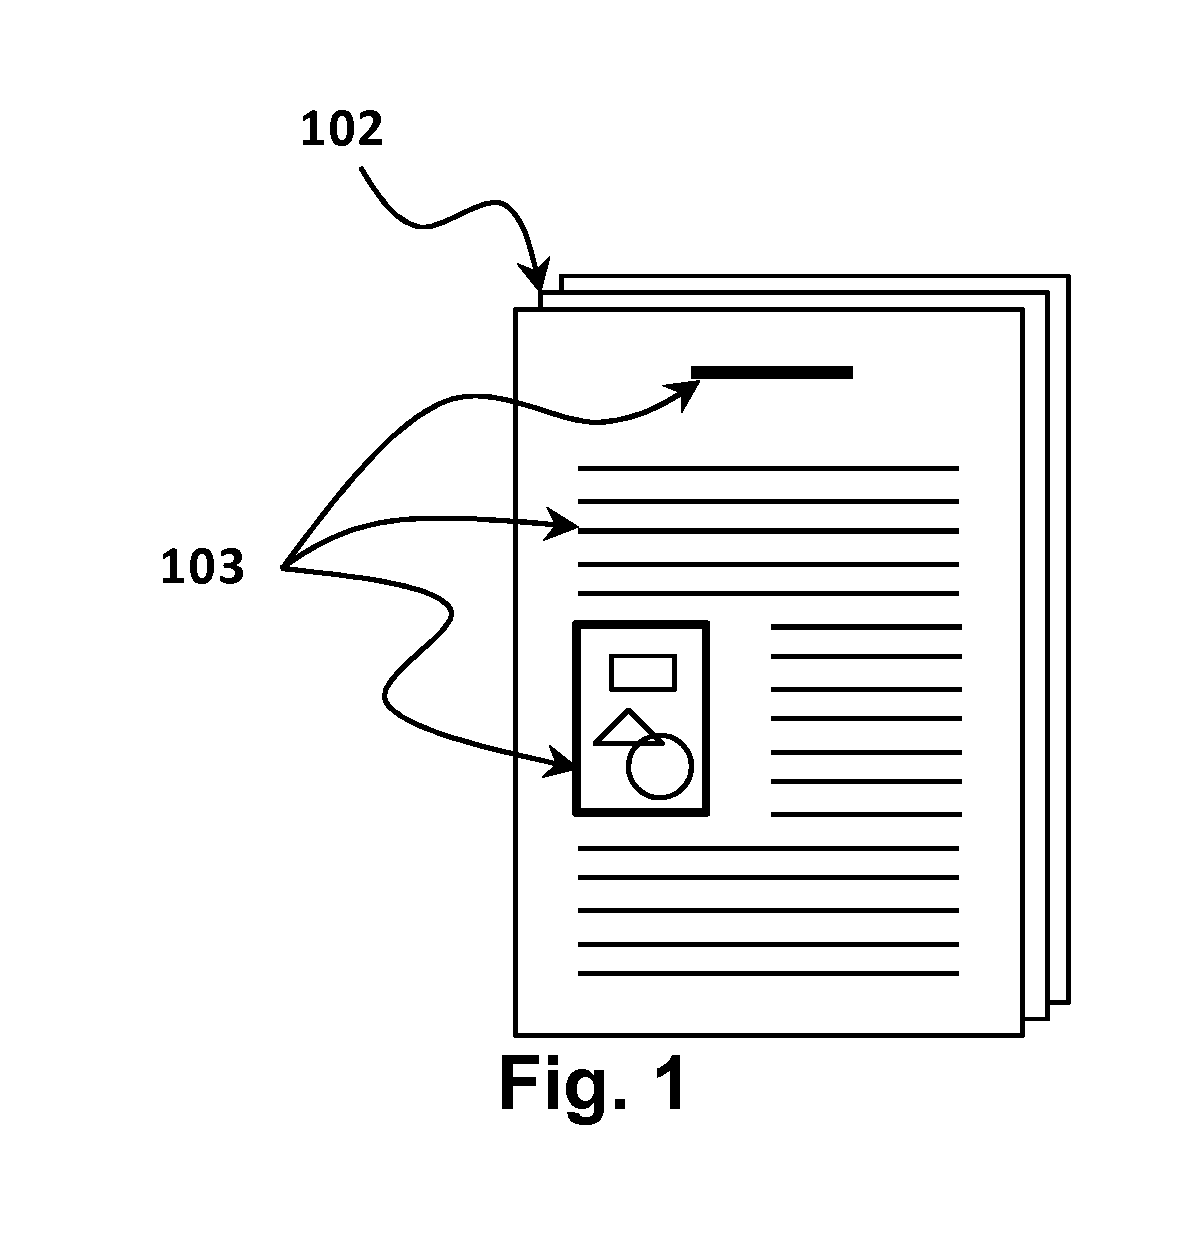 Method for generating a proof of a print job comprising a document to be printed with parameters and system therewith